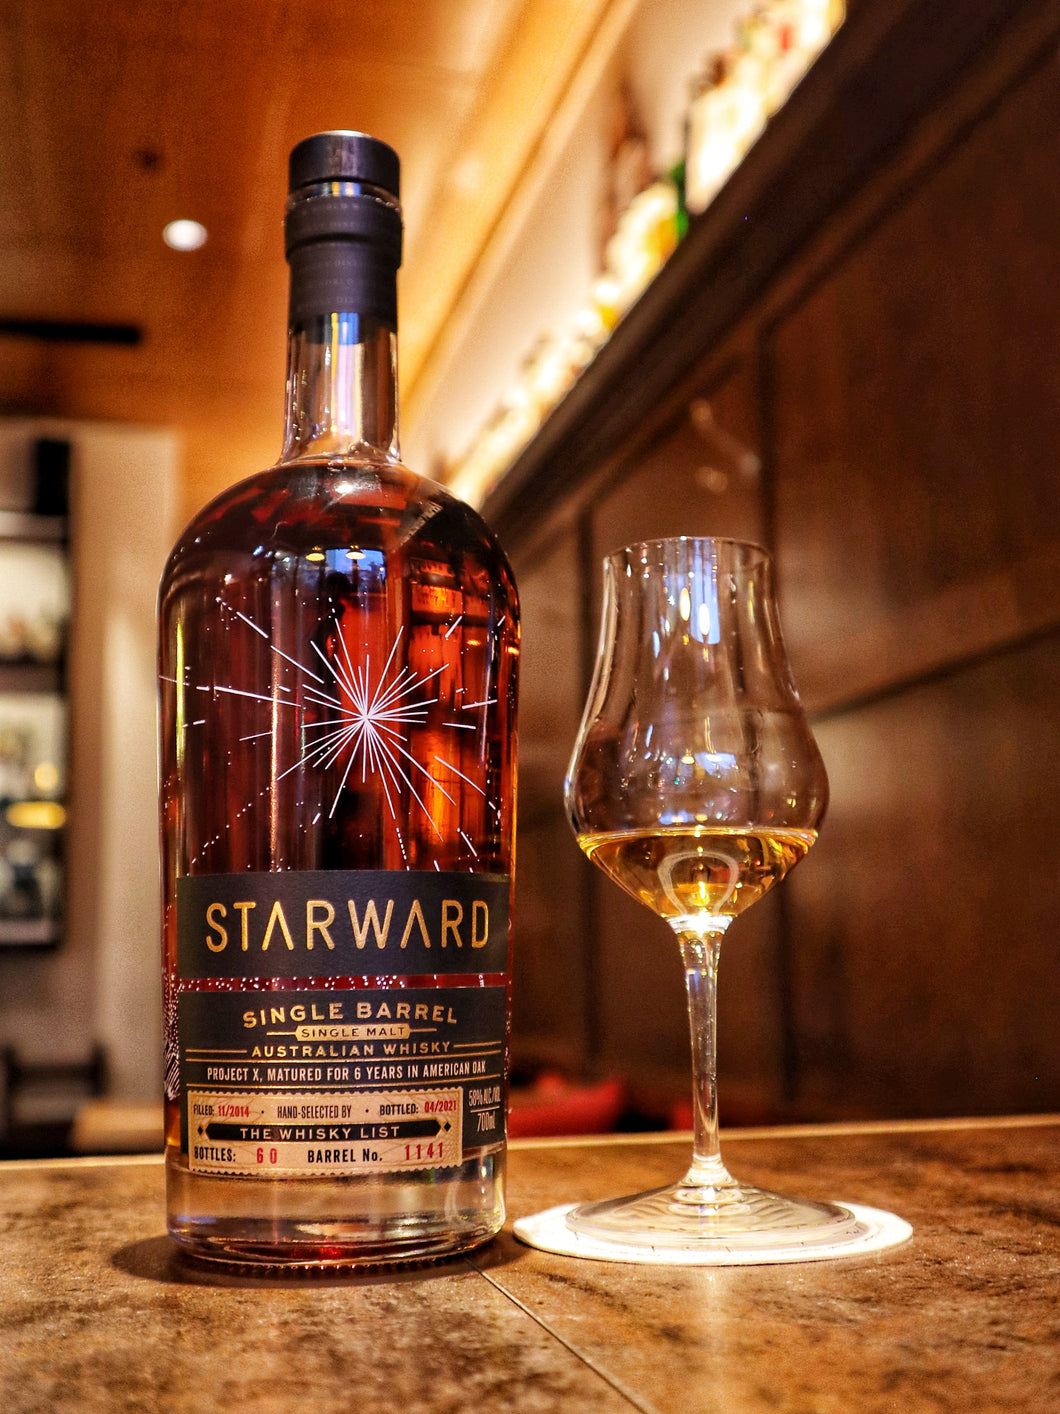 Starward Projects for The Whisky List 